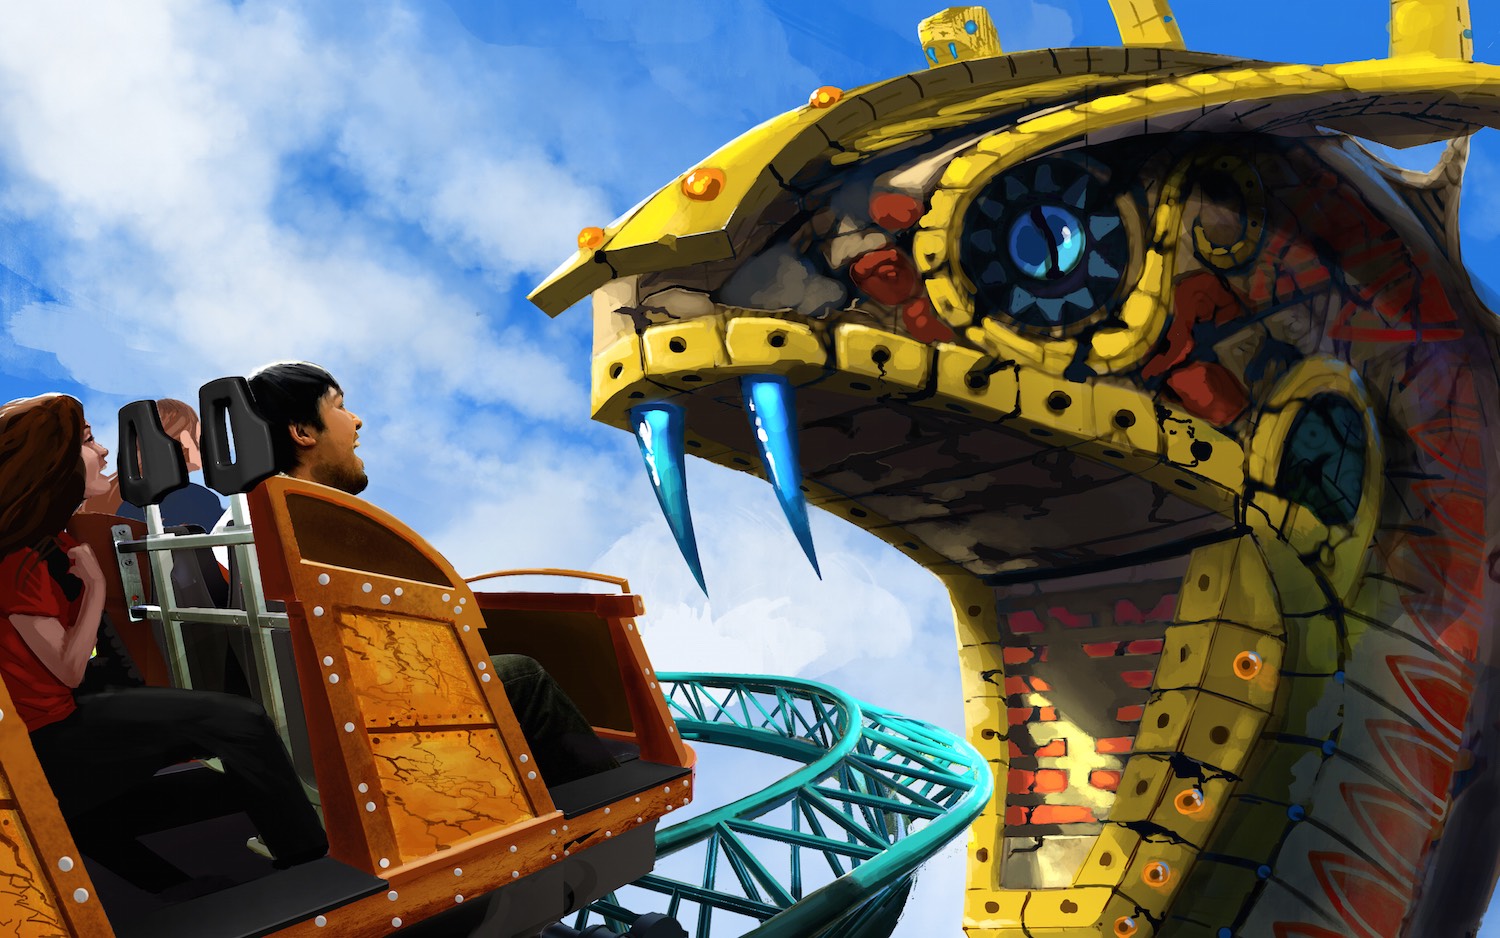 Busch Gardens Tampa Puts a Spin on Family Thrills in 2016